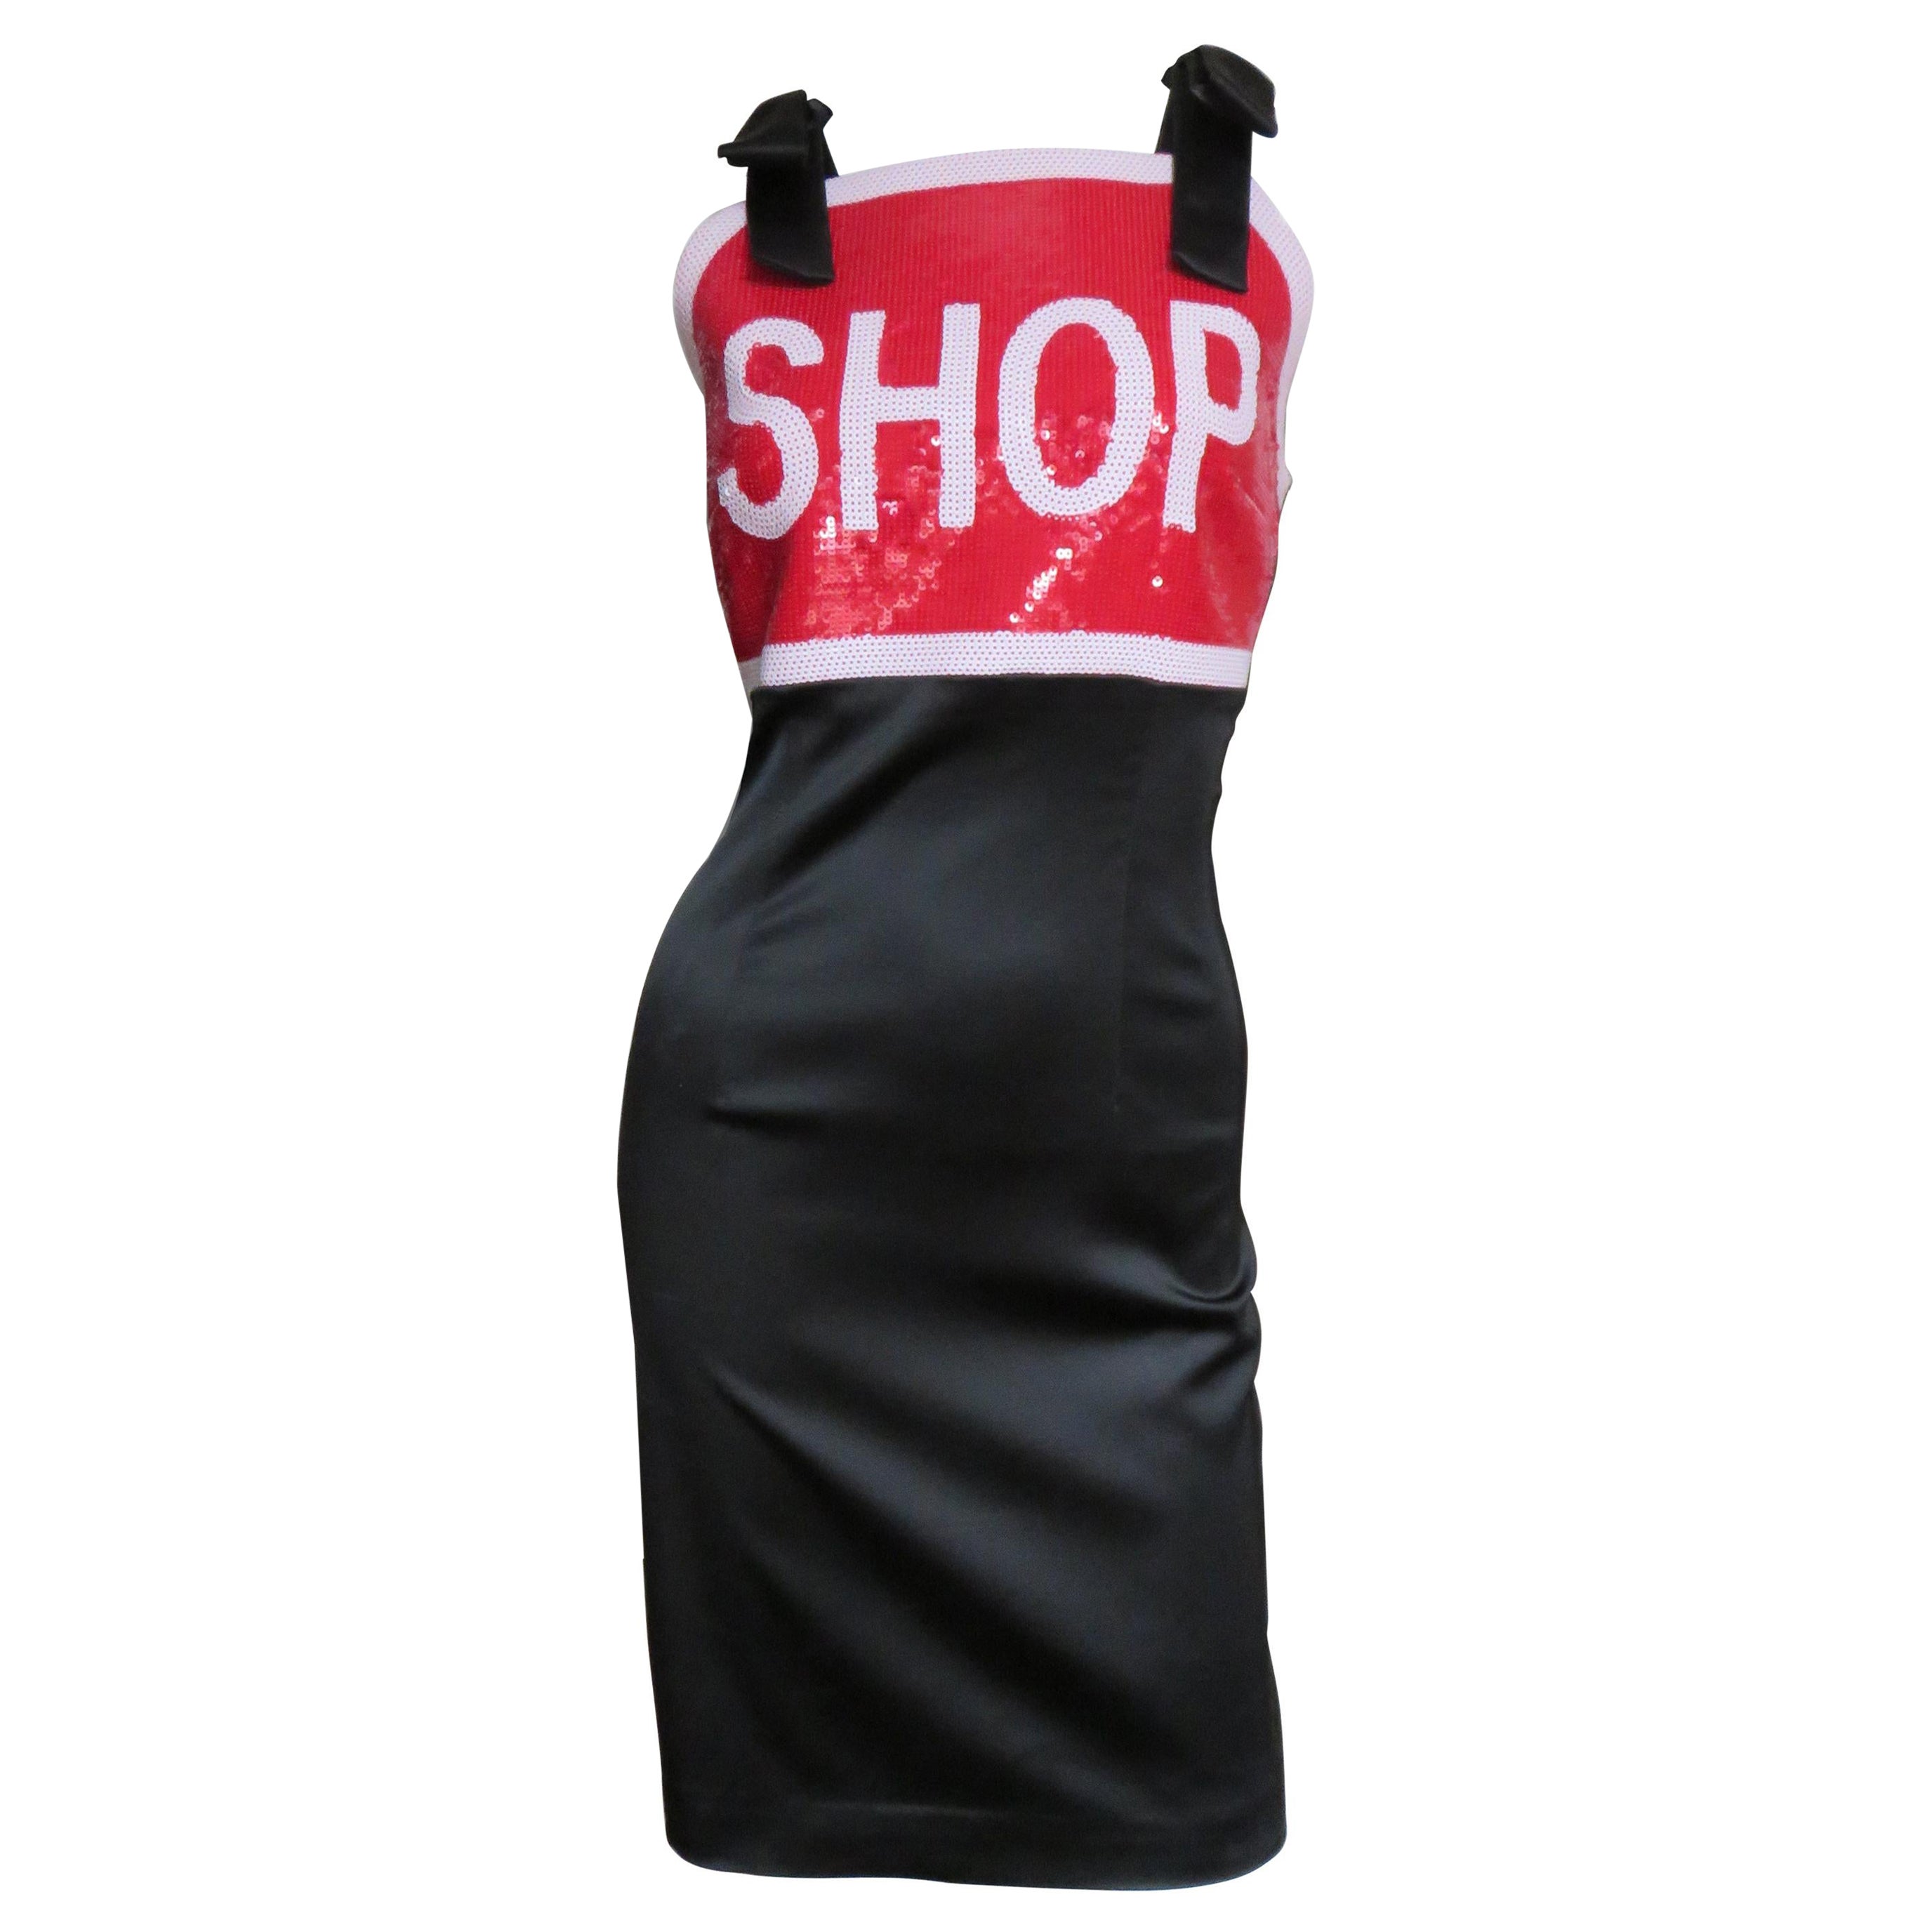 Moschino Couture Sequin SHOP Sign Dress 